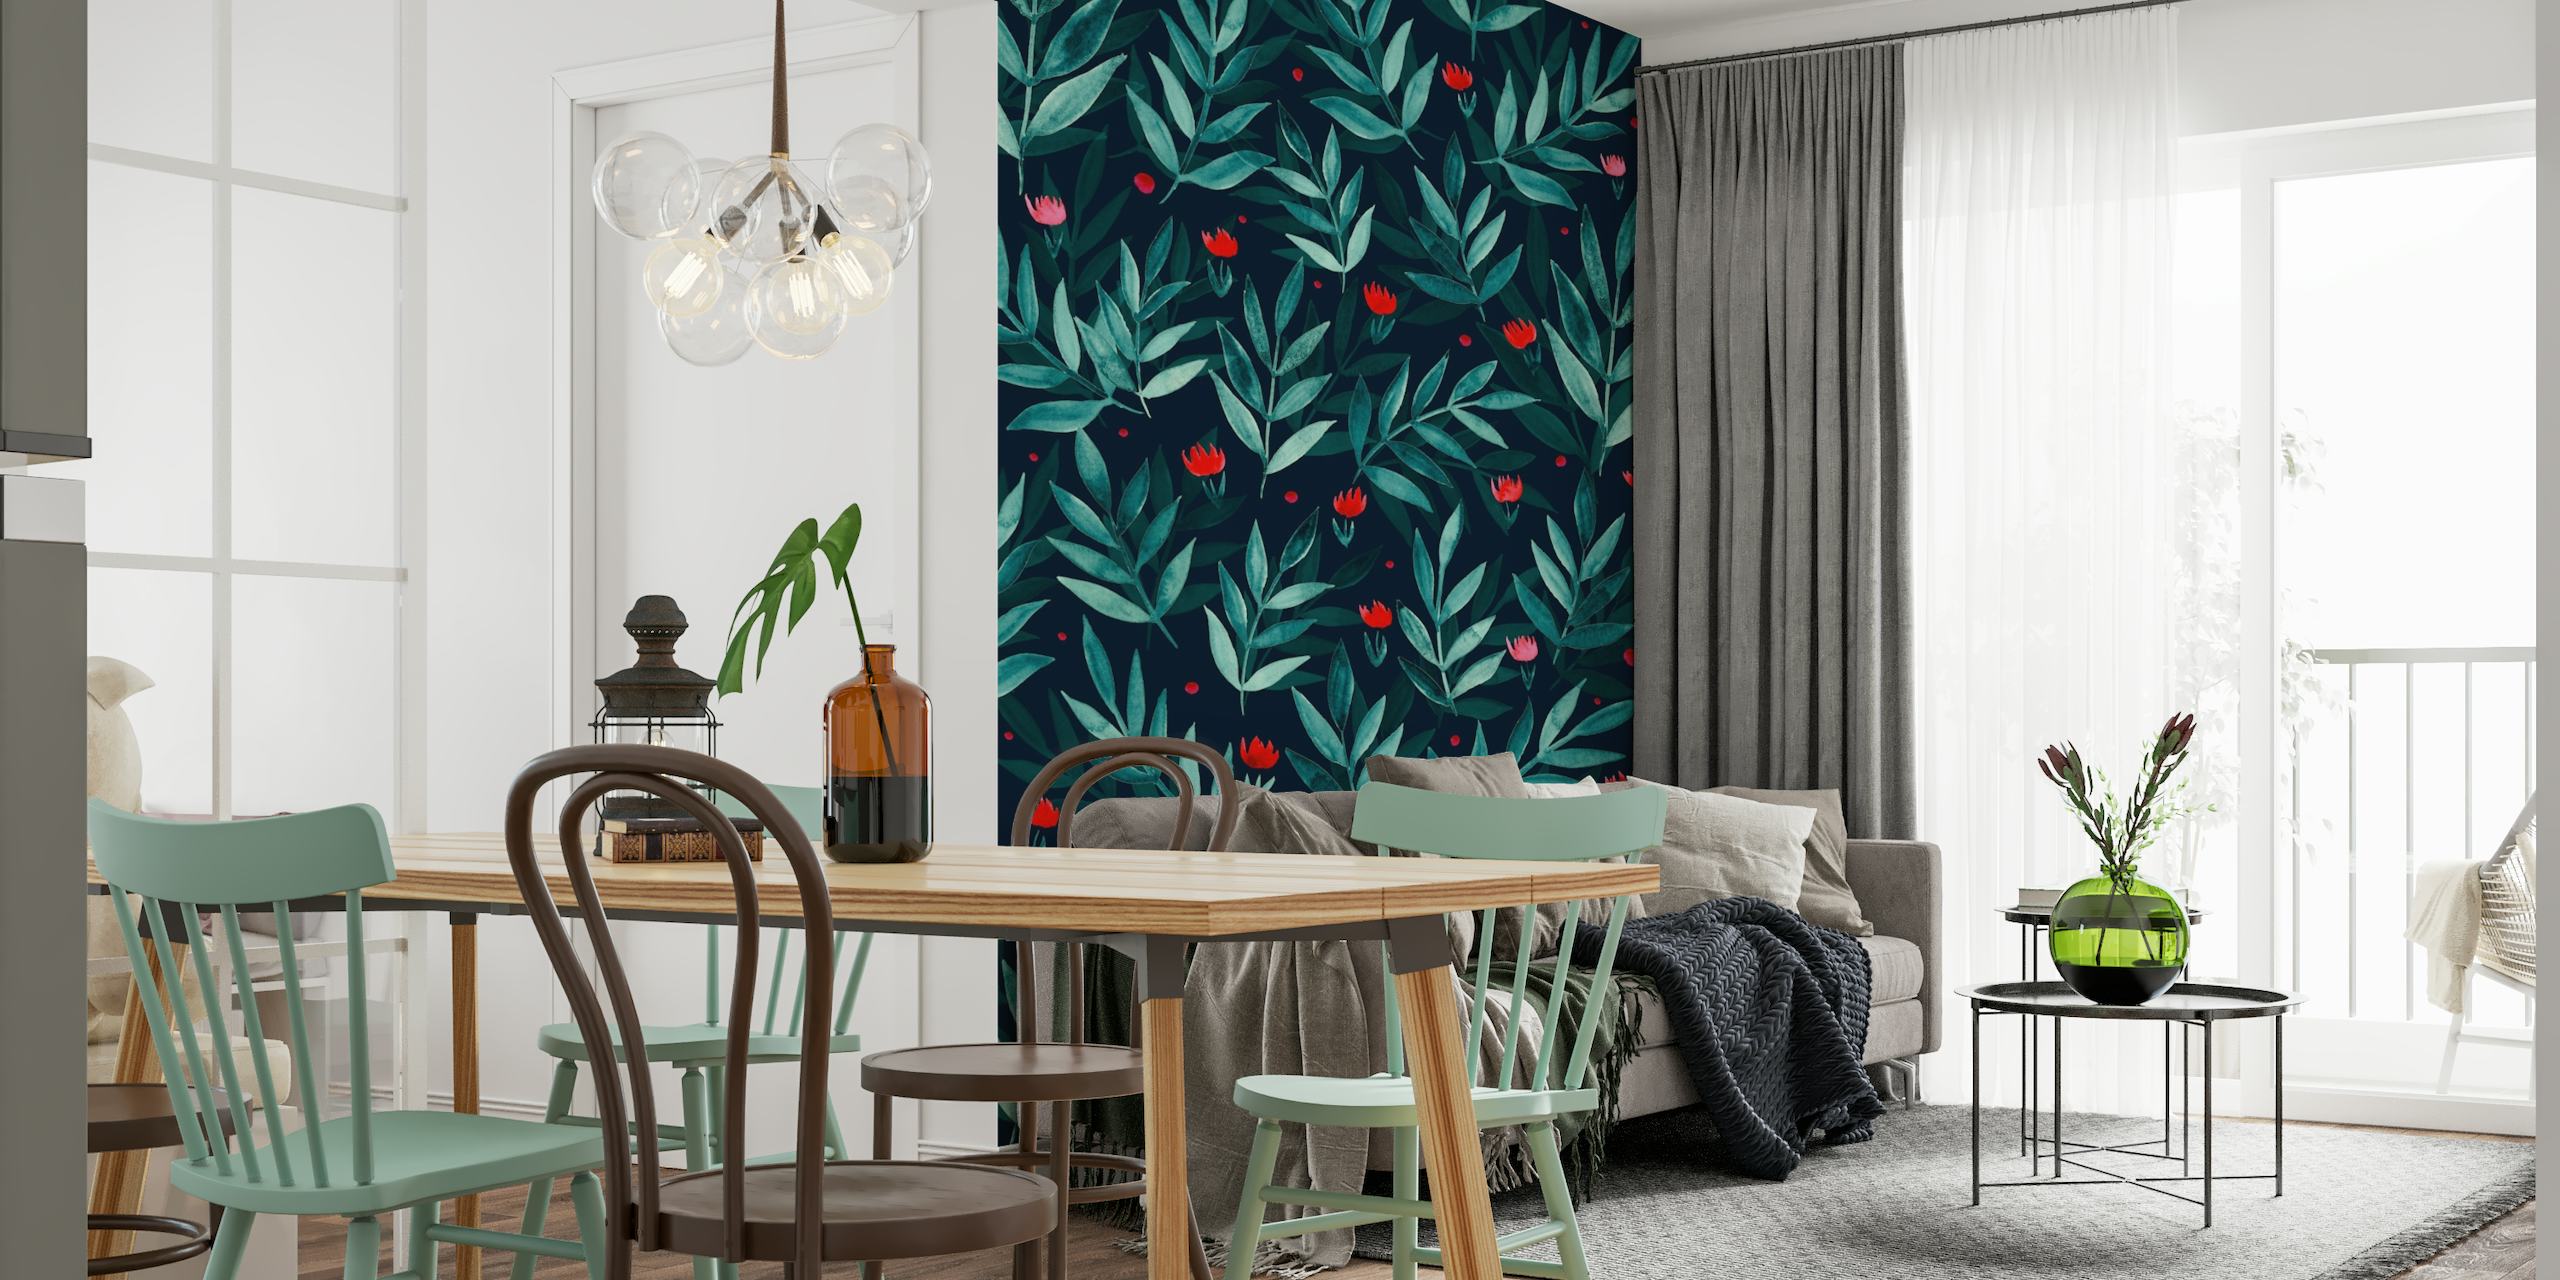 Night garden teal and red behang